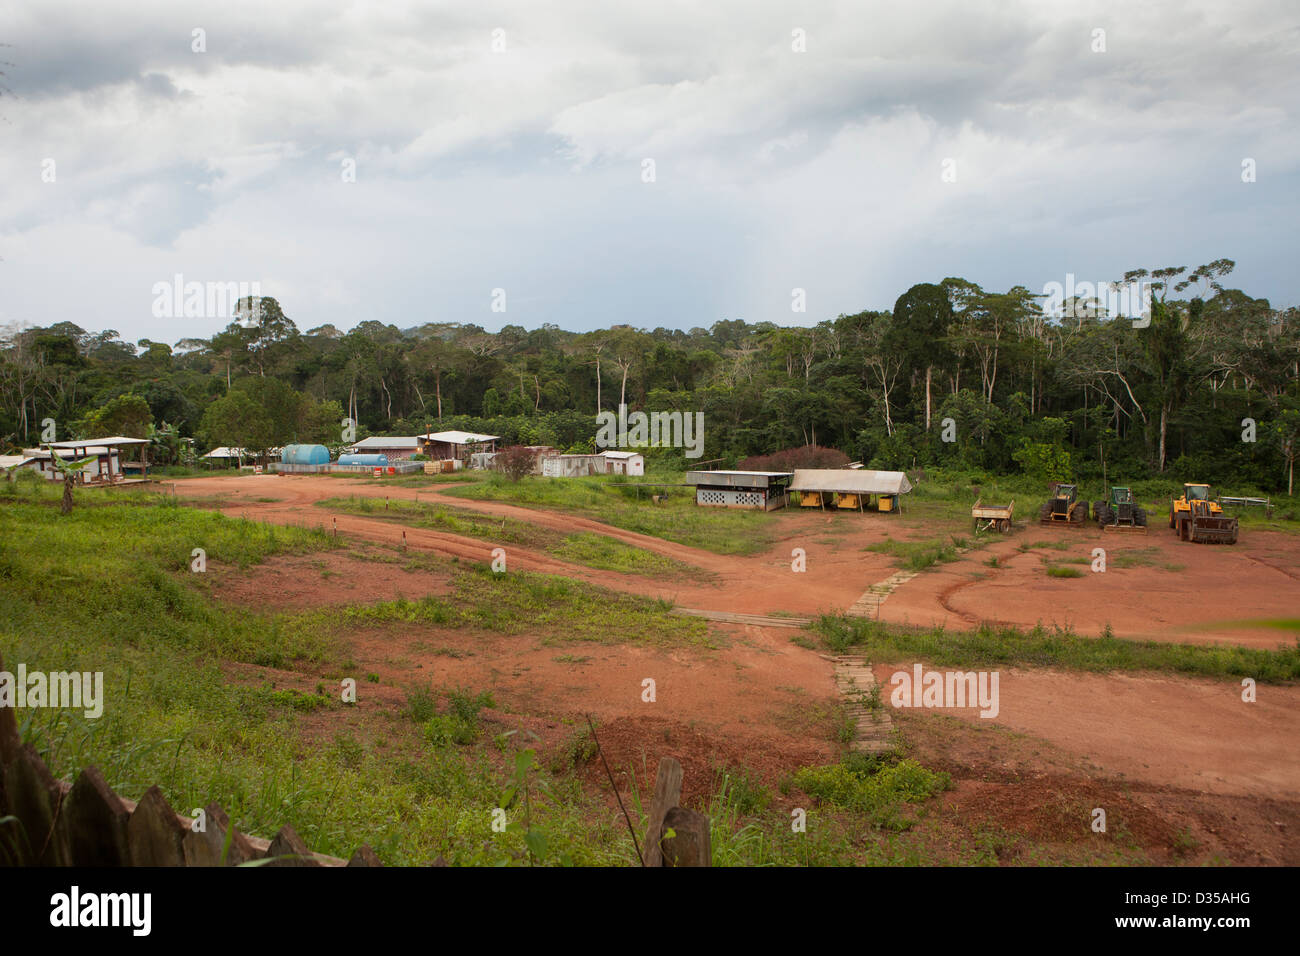 CAMEROON, 24th Sept 2012: A cobalt mine area has yet to begin extraction.   Photograph by Mike Goldwater Stock Photo